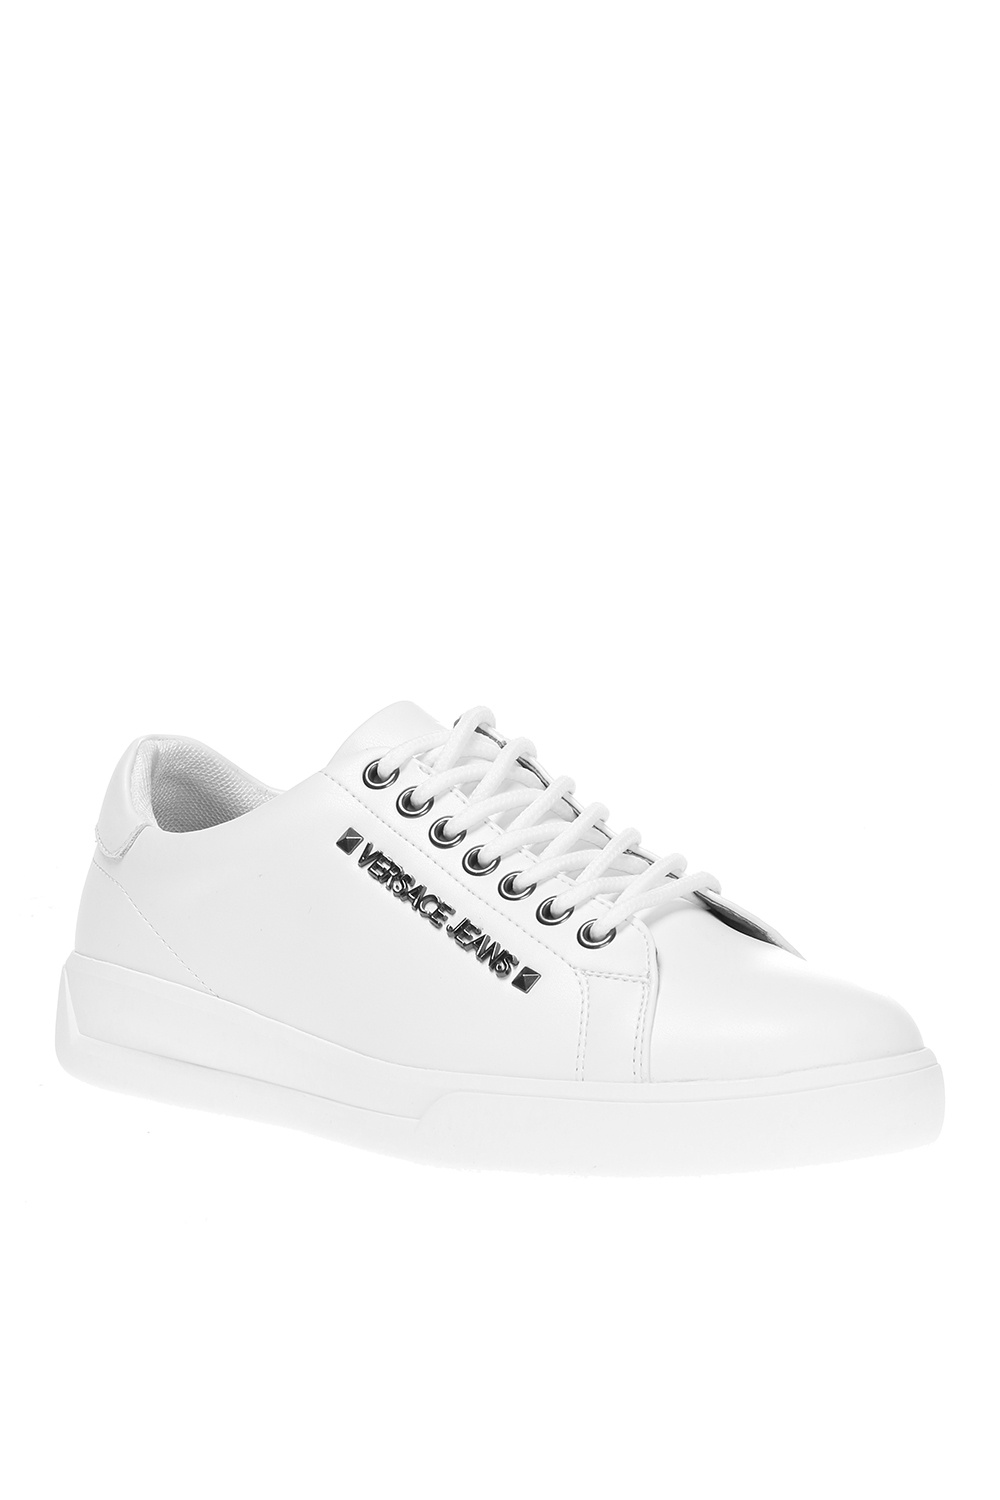 Versace Jeans Couture with logo | Men's Shoes | Vitkac